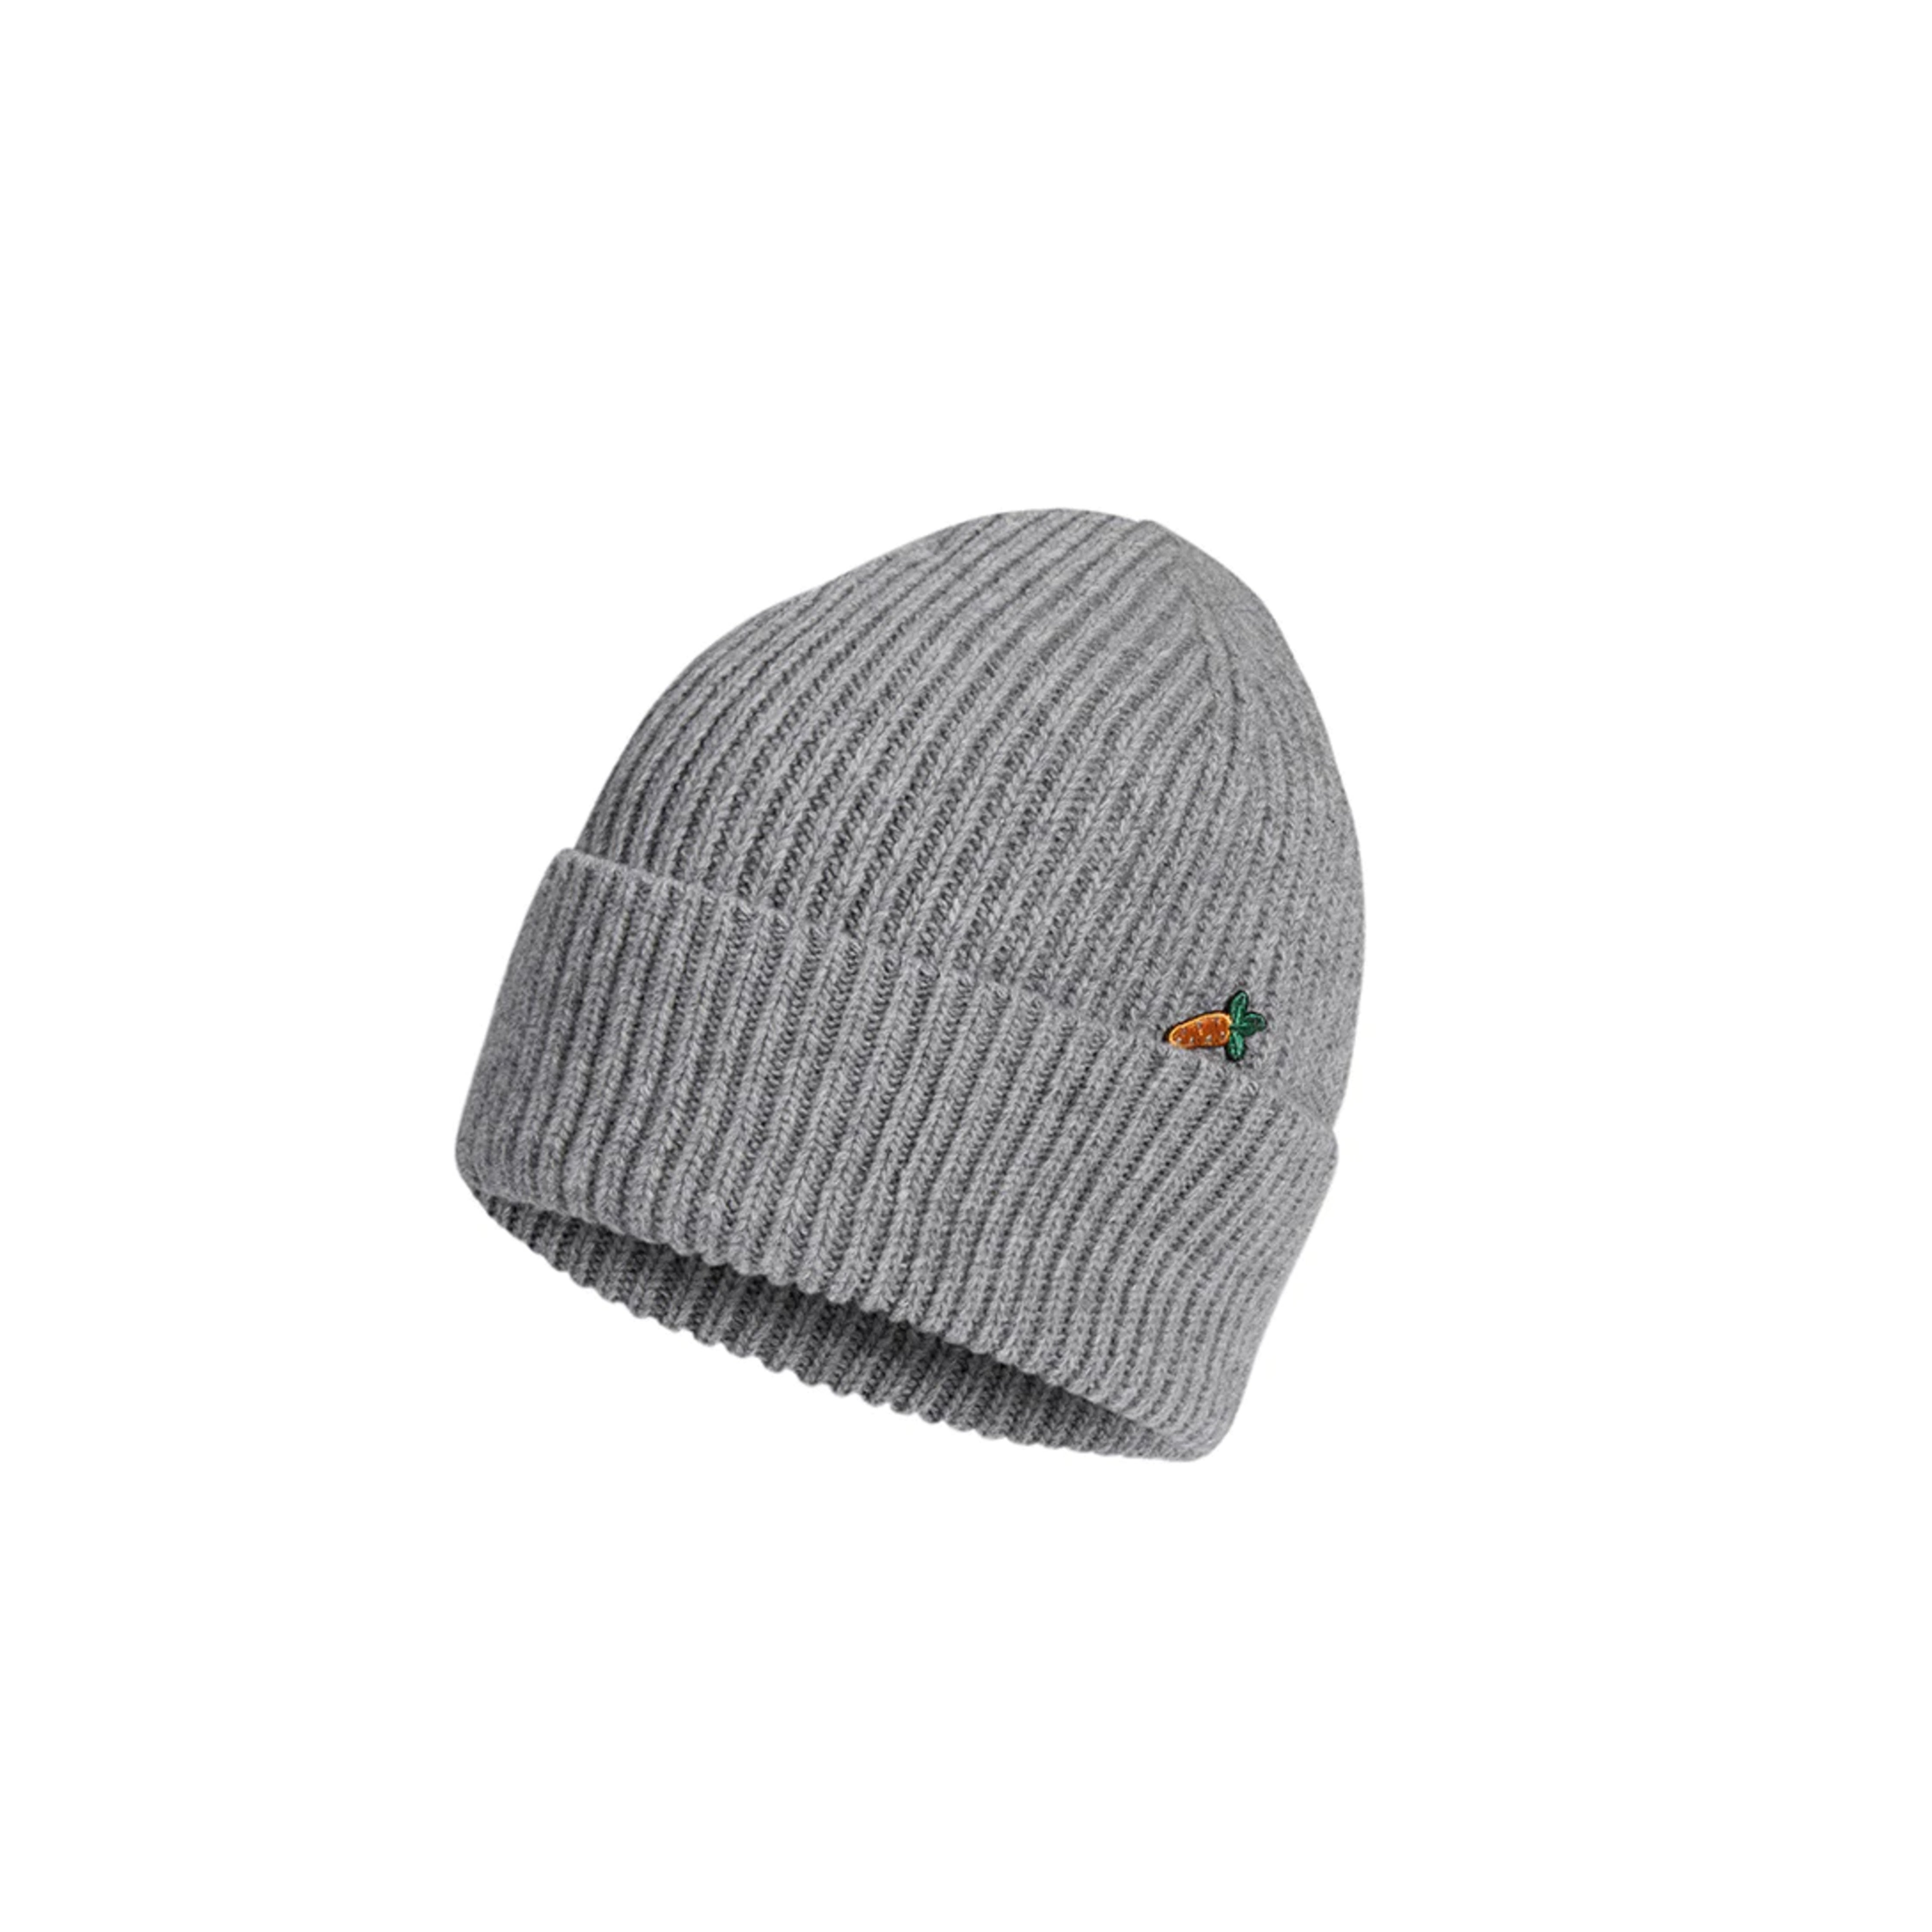 Get the Gallop Carrot Cashmere Beanie